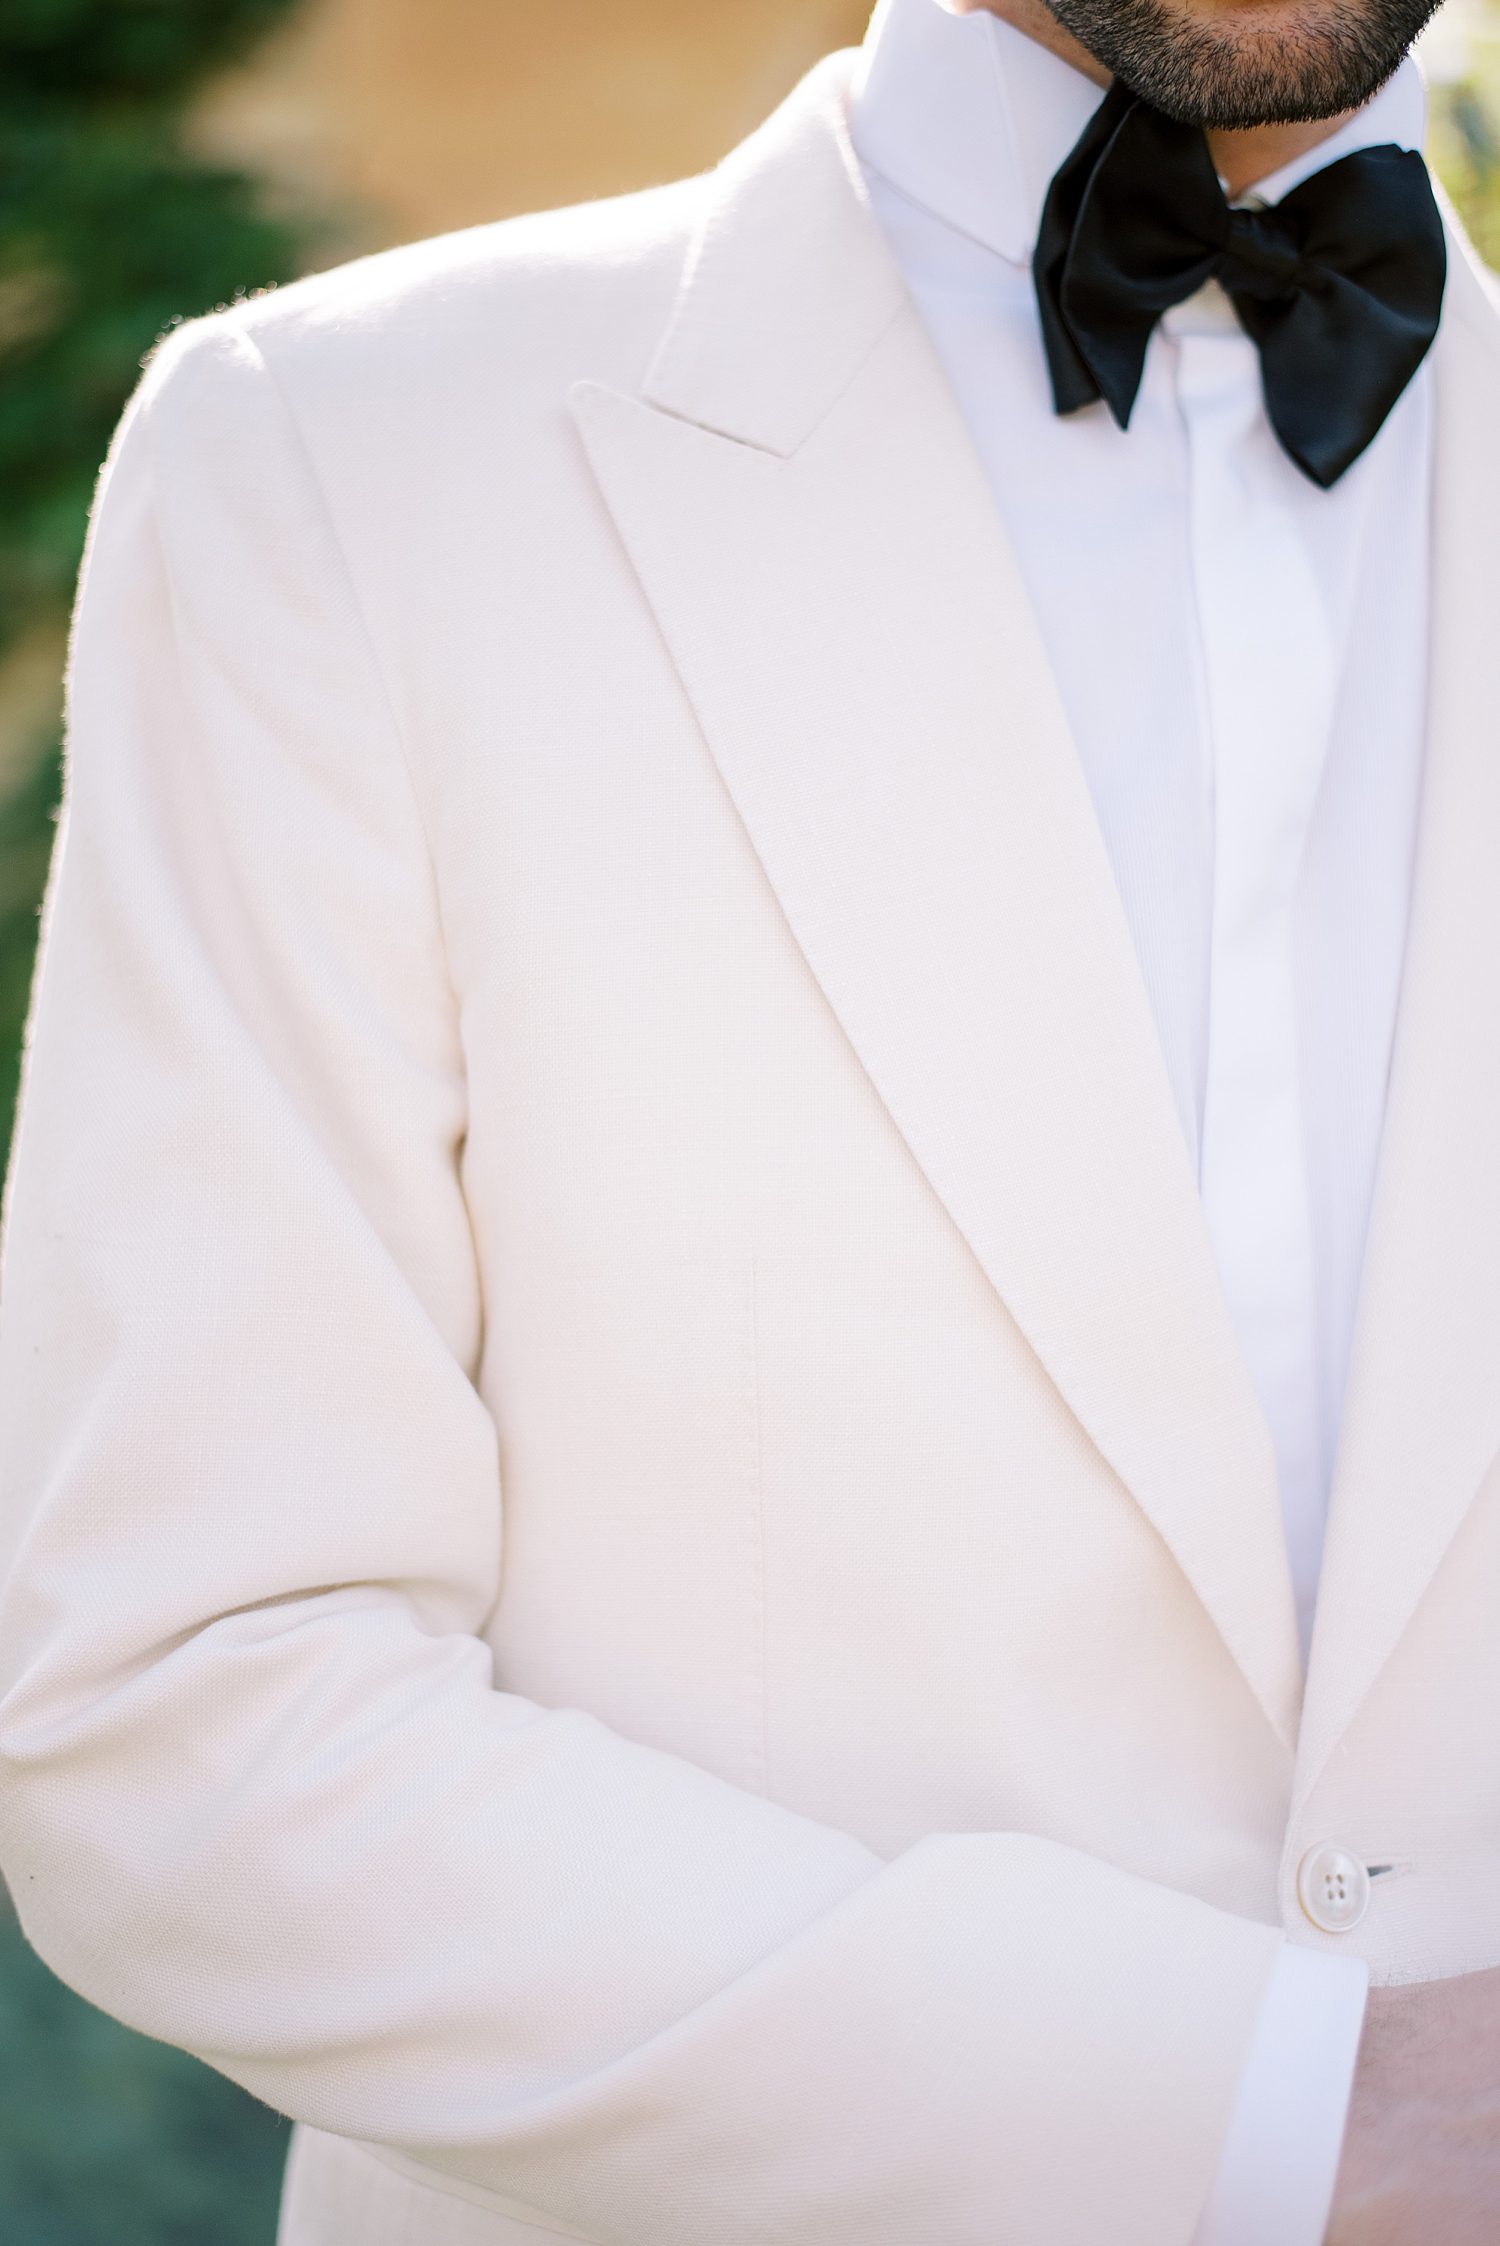 ivory suit jacket with black bow tie at Villa Balbiano